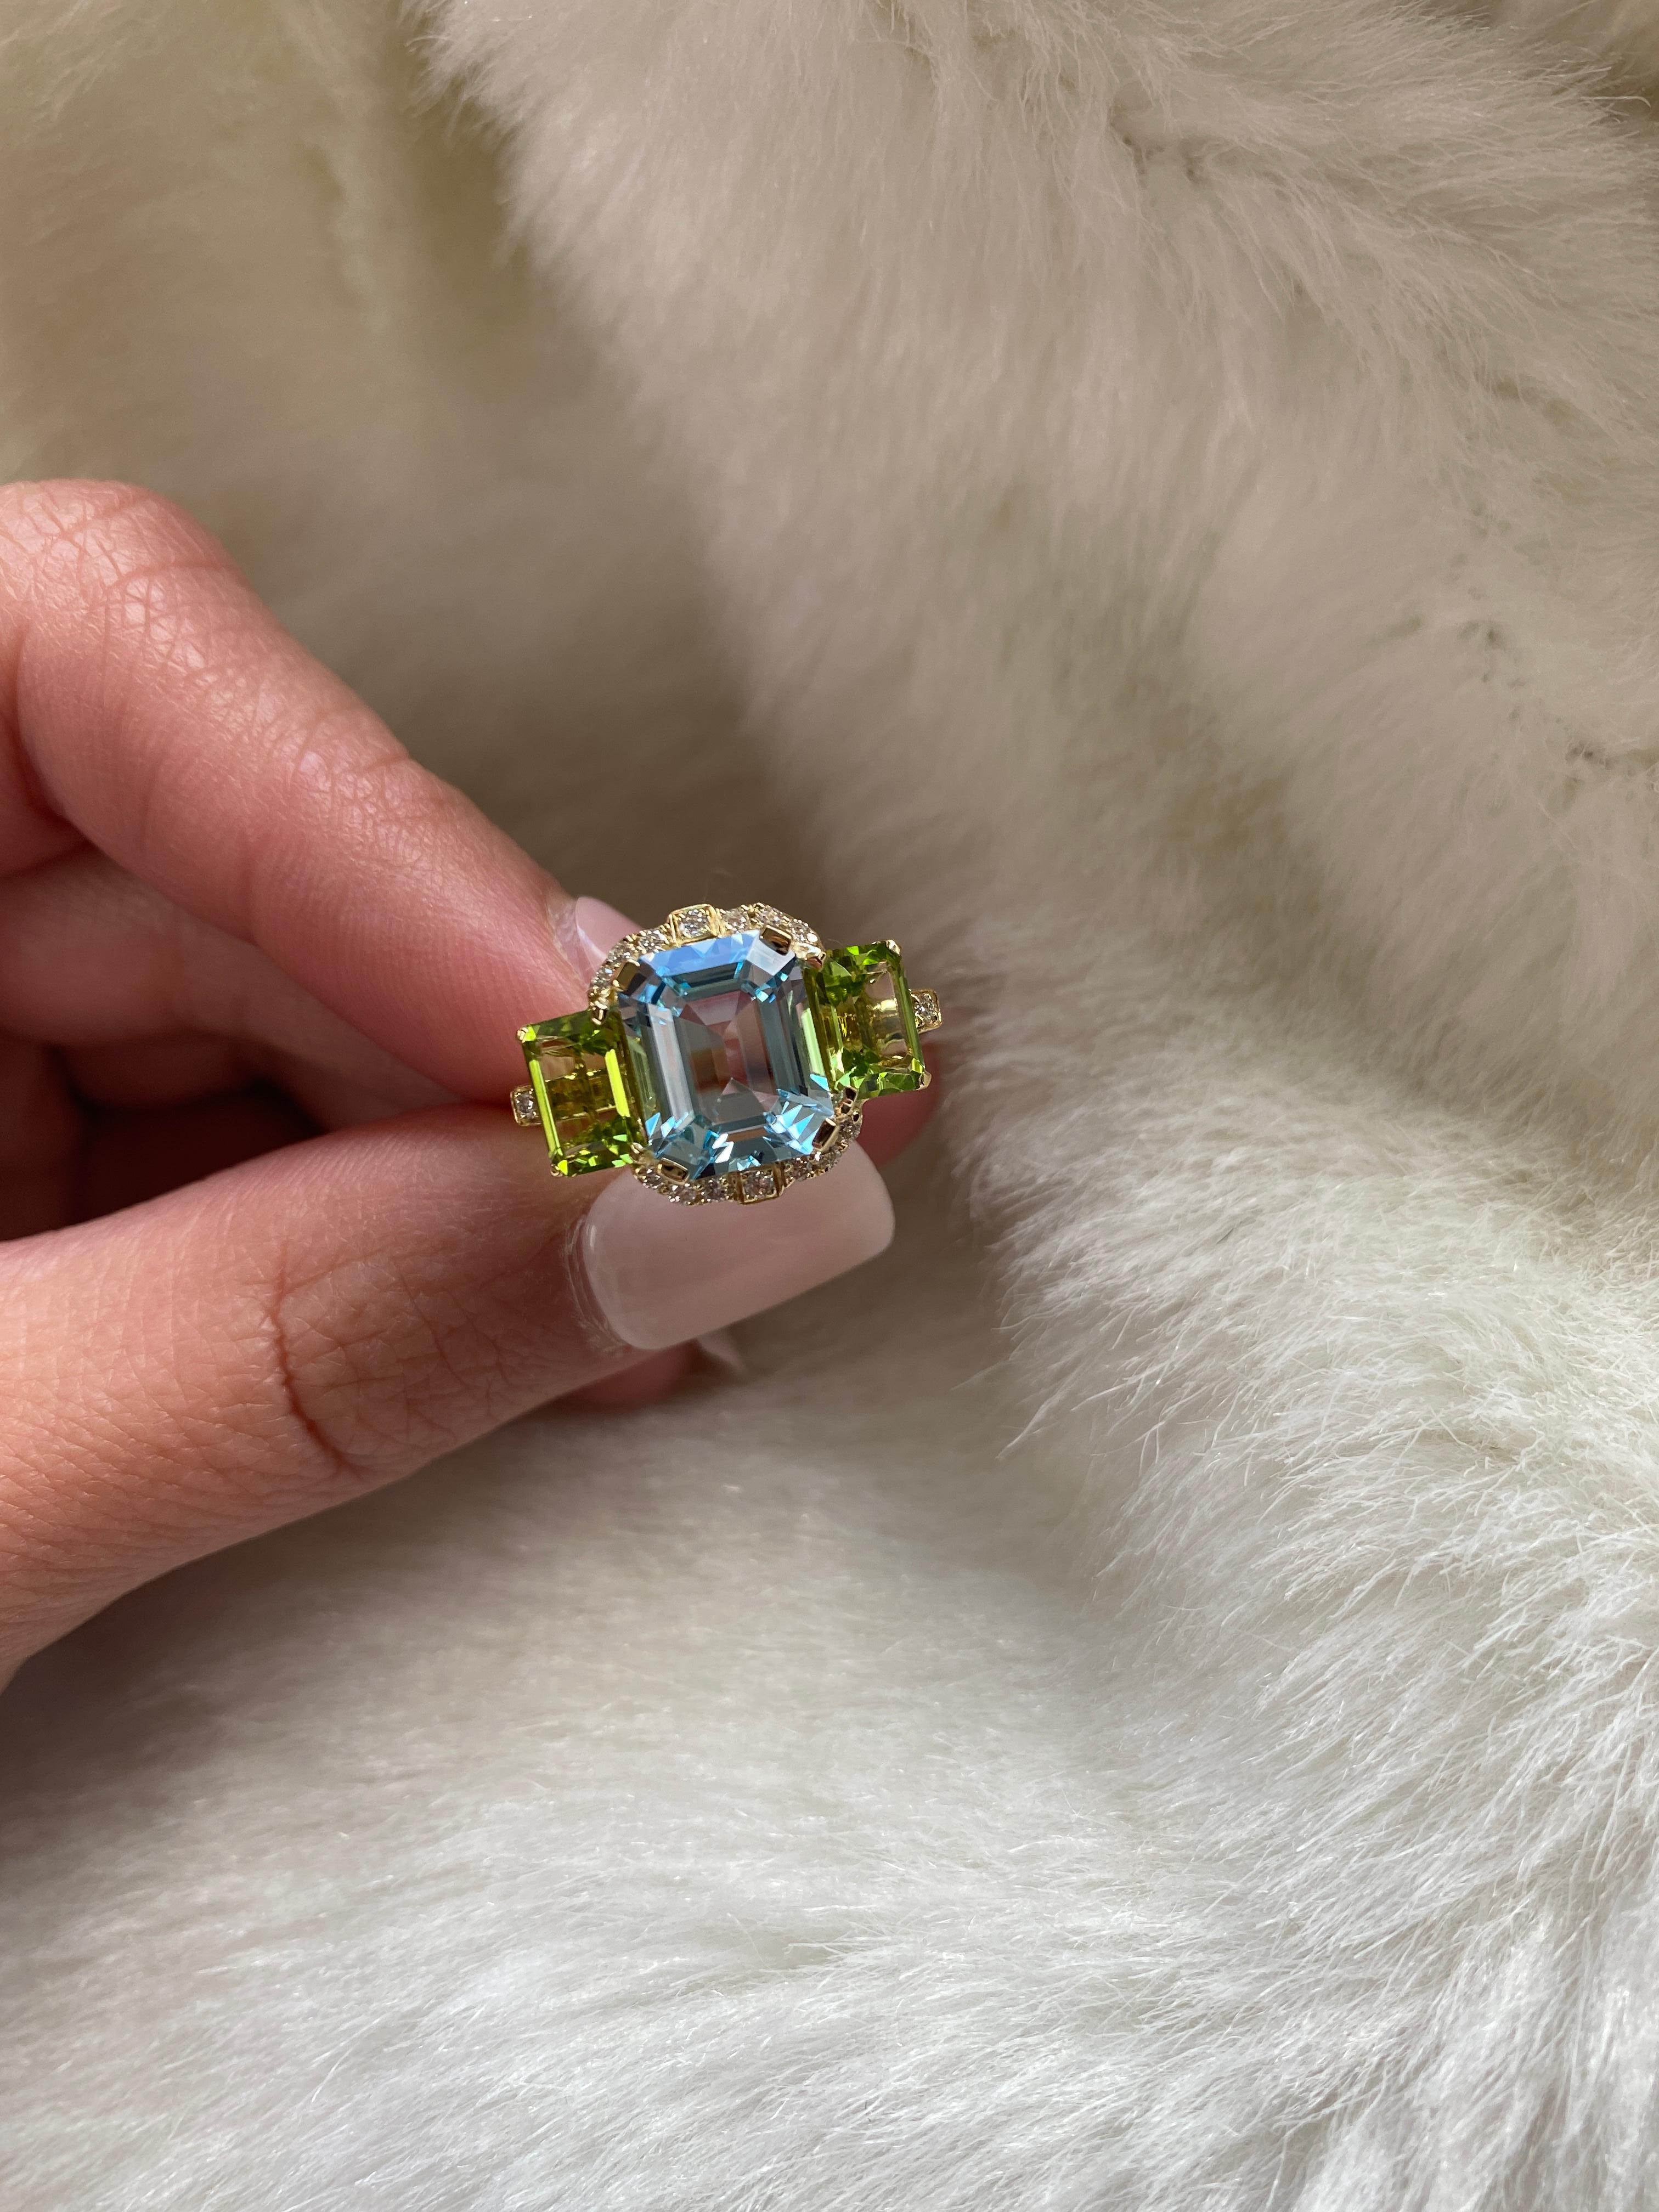 A perfect combination of Blue Topaz and Peridot is this 3 Stone Emerald Cut Ring with Diamonds set in 18K Yellow Gold. From our popular 'Gossip' Collection, this piece carries a hint of shock value.

* Stone Size: 10 x 8 - 7 x 5 mm
* Gemstone: 100%